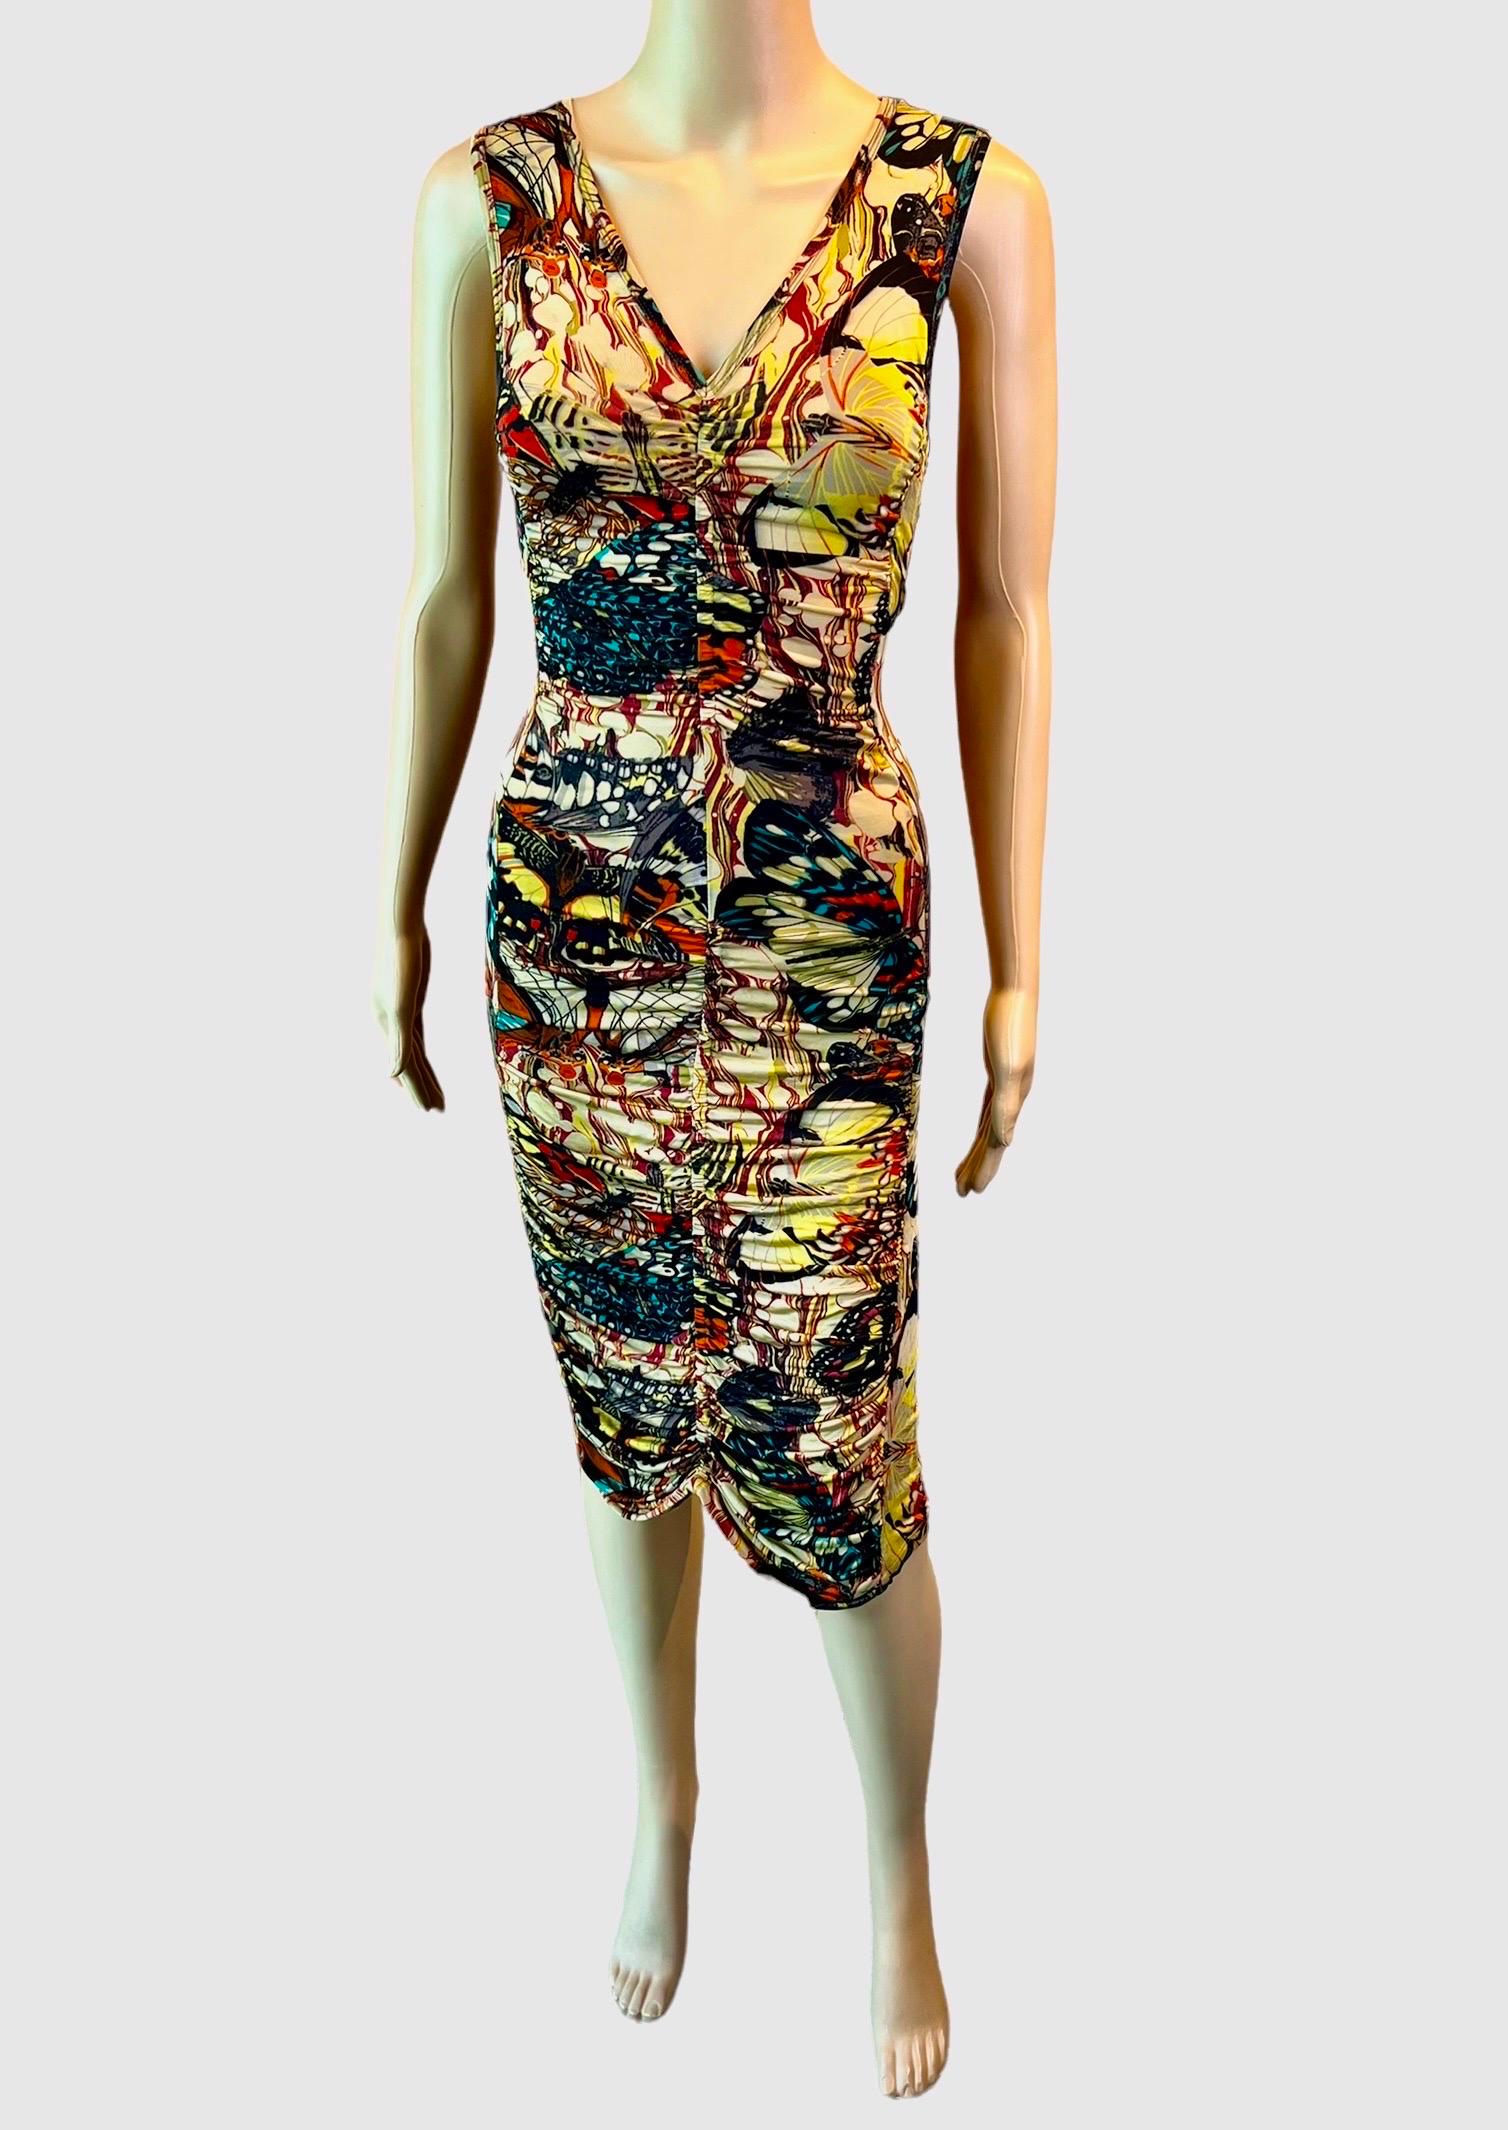 Black Jean Paul Gaultier Soleil S/S 2003 Butterfly Print Ruched Bodycon Mini Dress For Sale